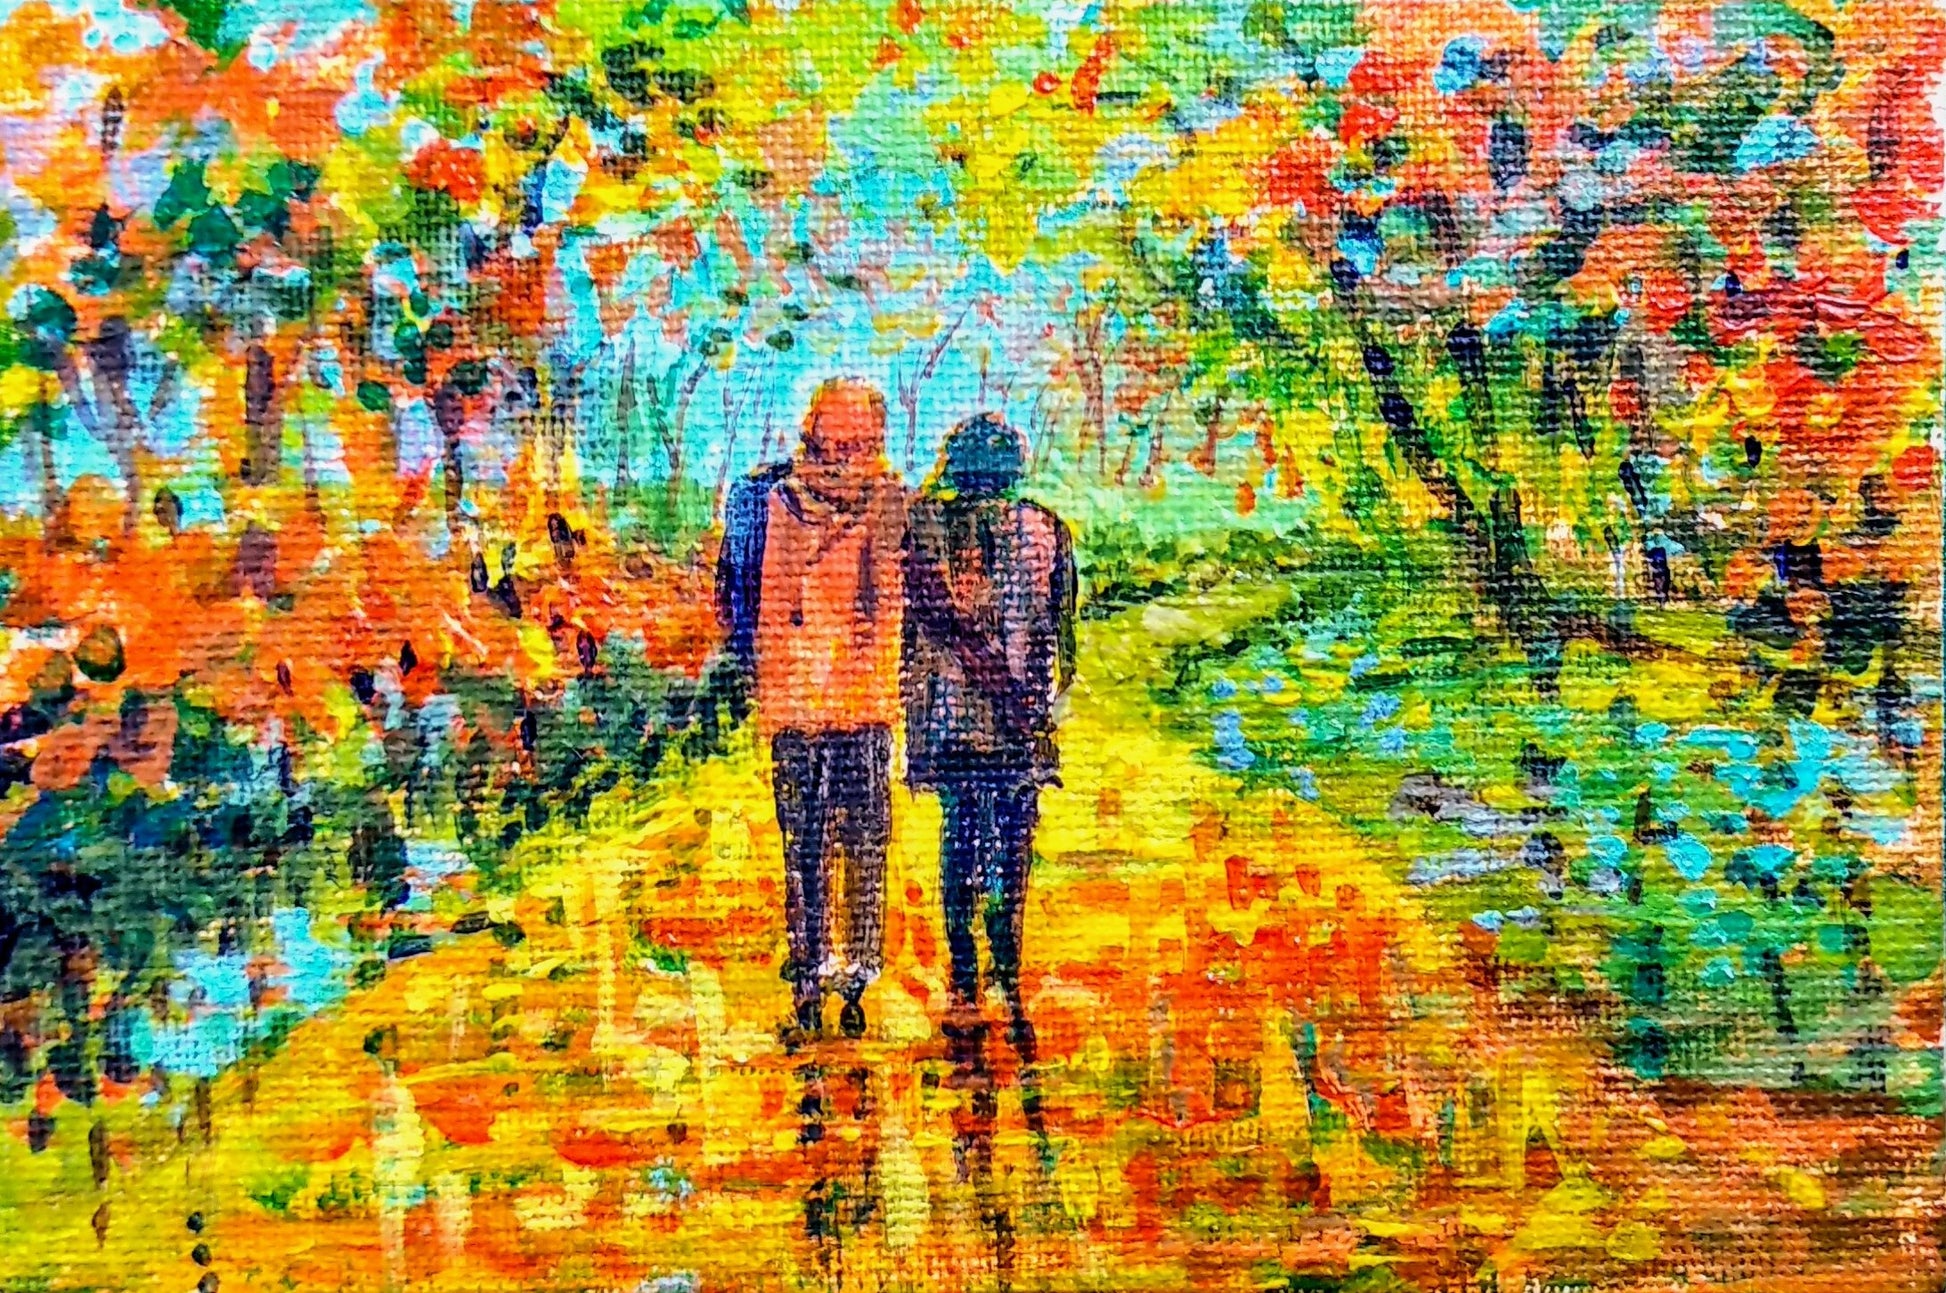 Romantic walk in autumn, Lovers stroll canvas painting